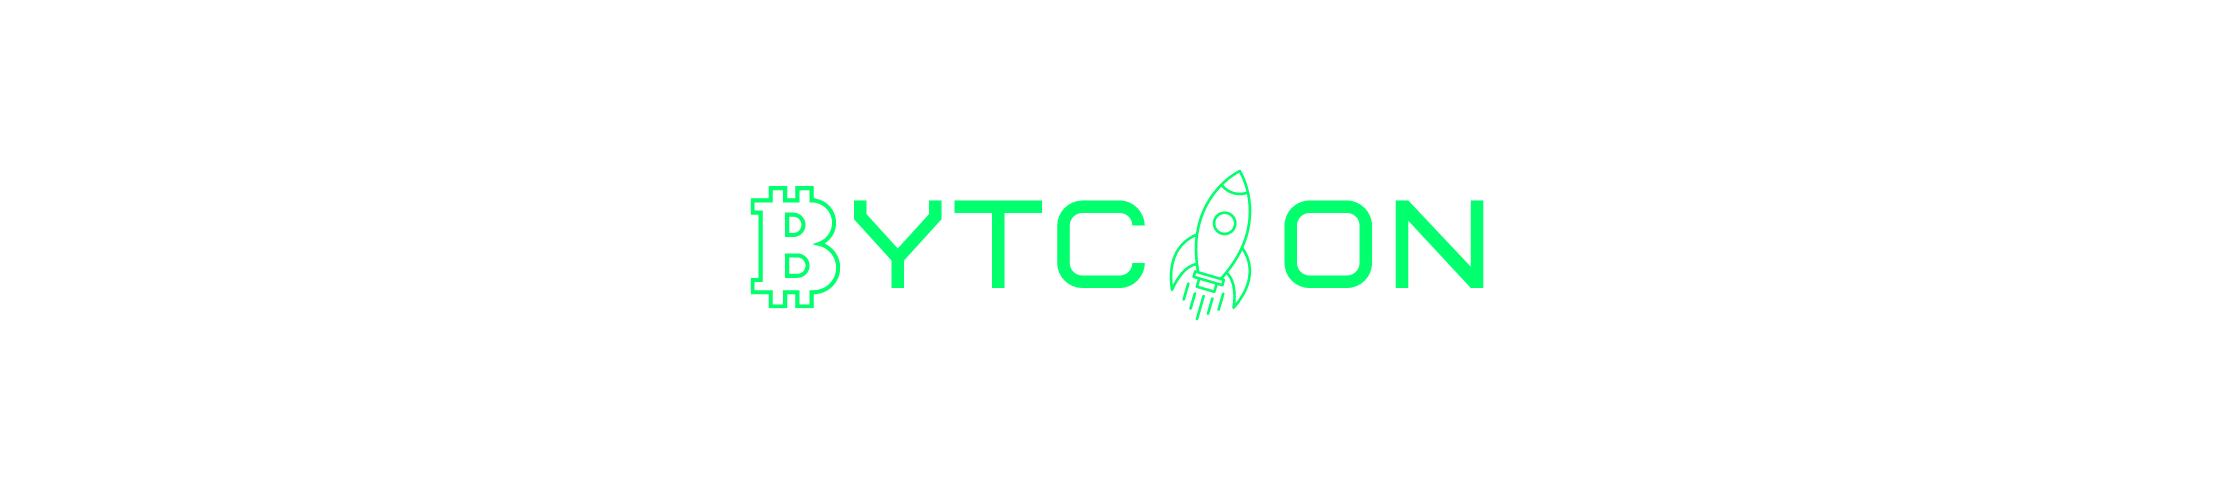 Free Bitcoin Advice with Bytcion Crypto Search Engine and Concierge Changelly Cryptocurrency Exchange Platform Trezor Ledger Model T Tokens Net Platform Binance Crypto Currency Exchange Local Bitcoins service trading Buybit BTC Exchange Trezor One Metallic Bitcoin Litecoin Dash XRP and more. Explore the thousands of crypto Trezor Model T currencies in our crypto database ETH ETHEREUM BYTCION COIN Crypto currency personal coin concierge service.